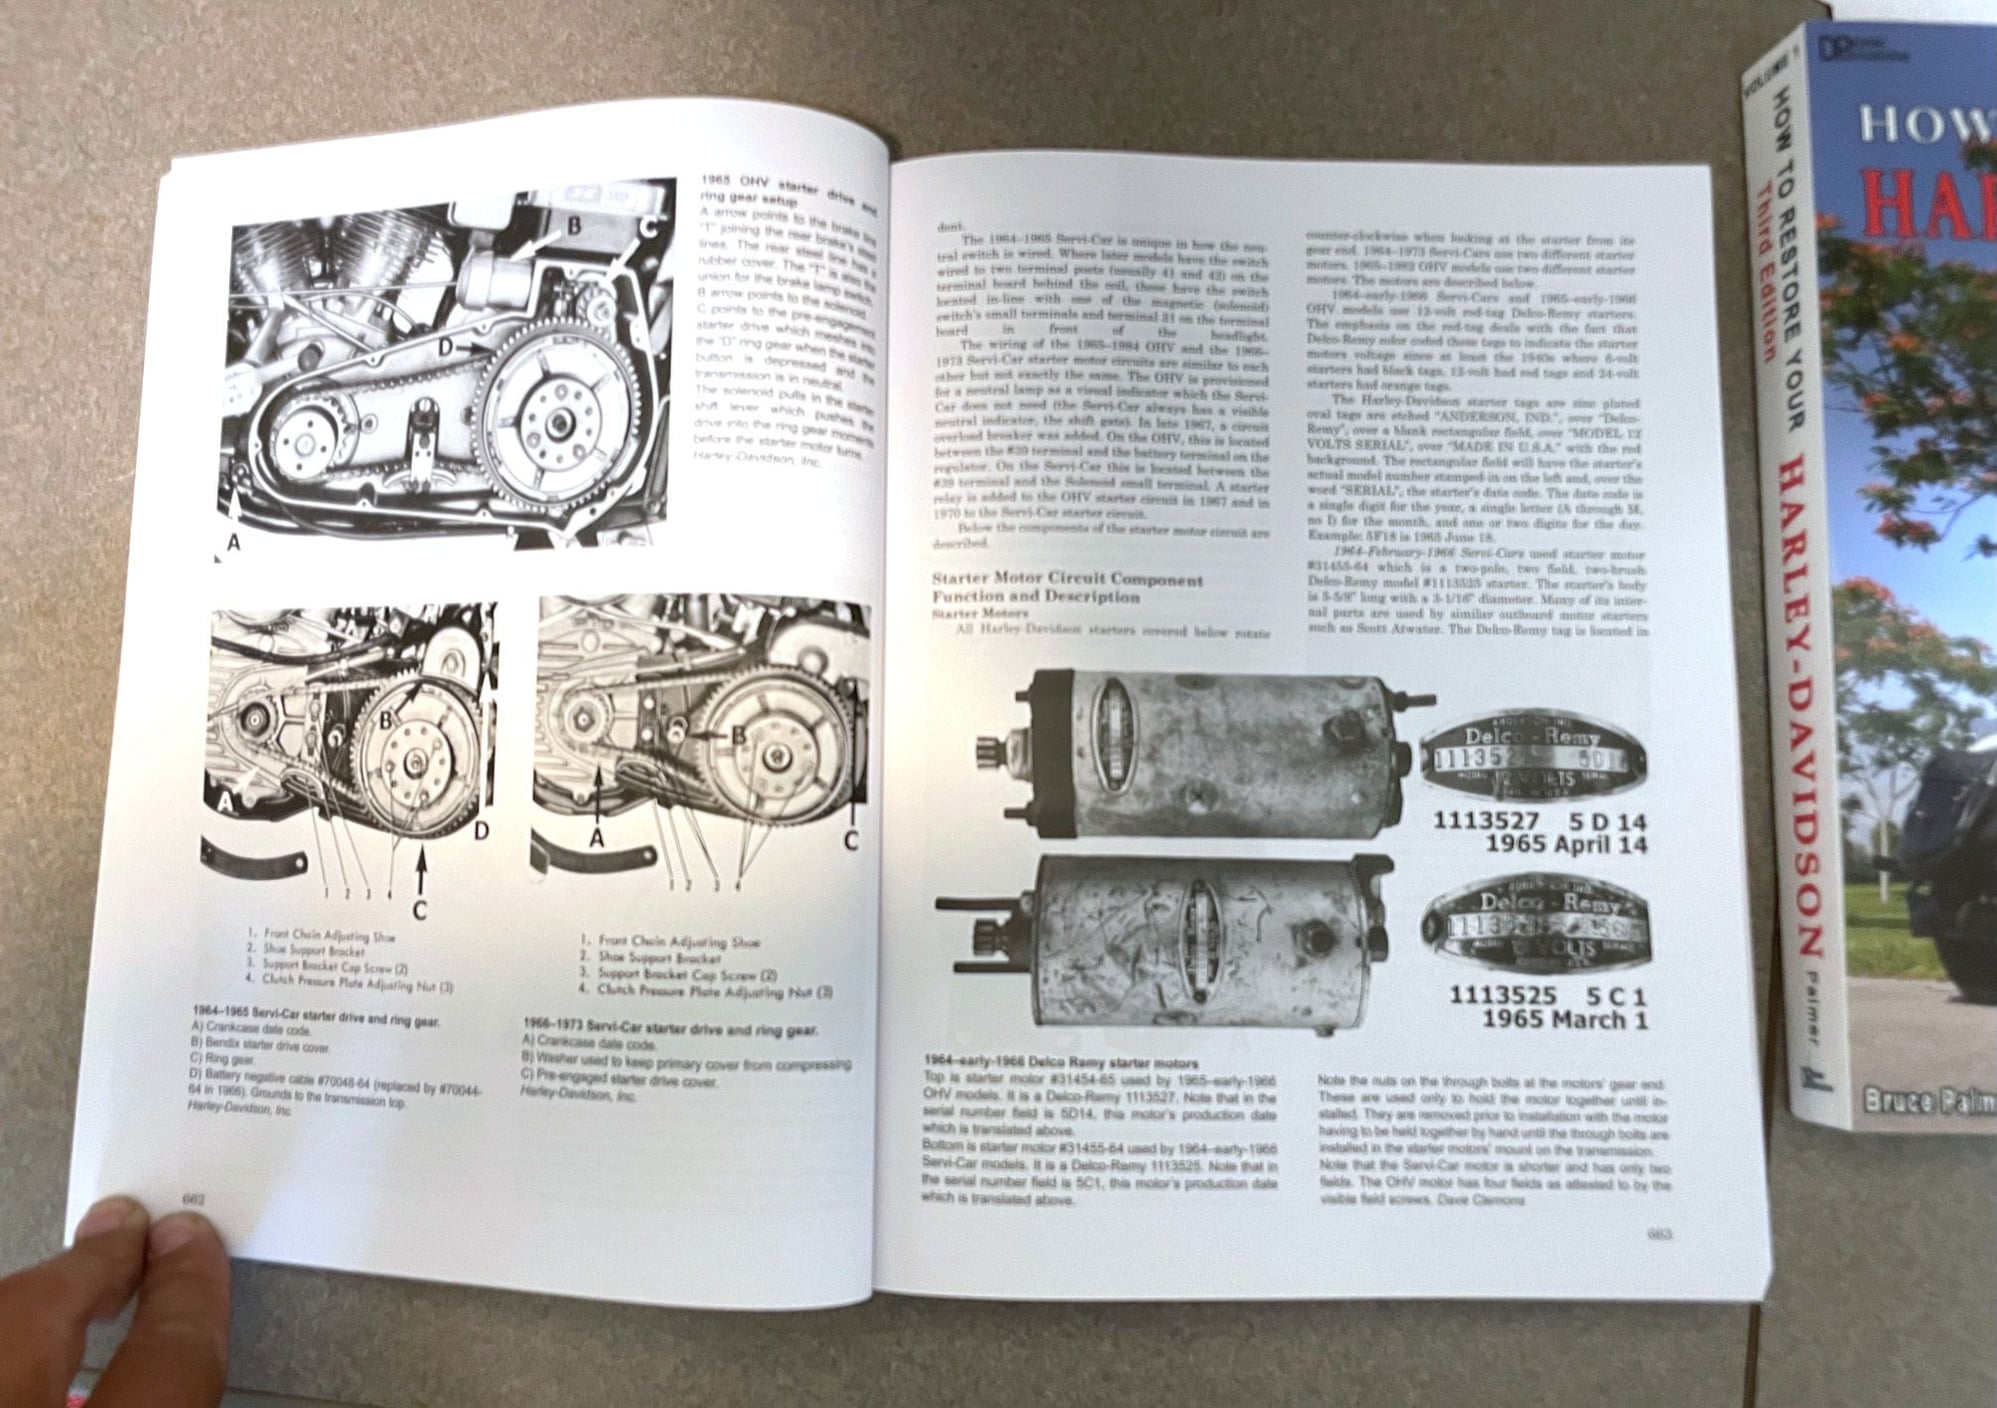 Bruce Palmer guide to restoring your HD 3rd edition $150 - Harley